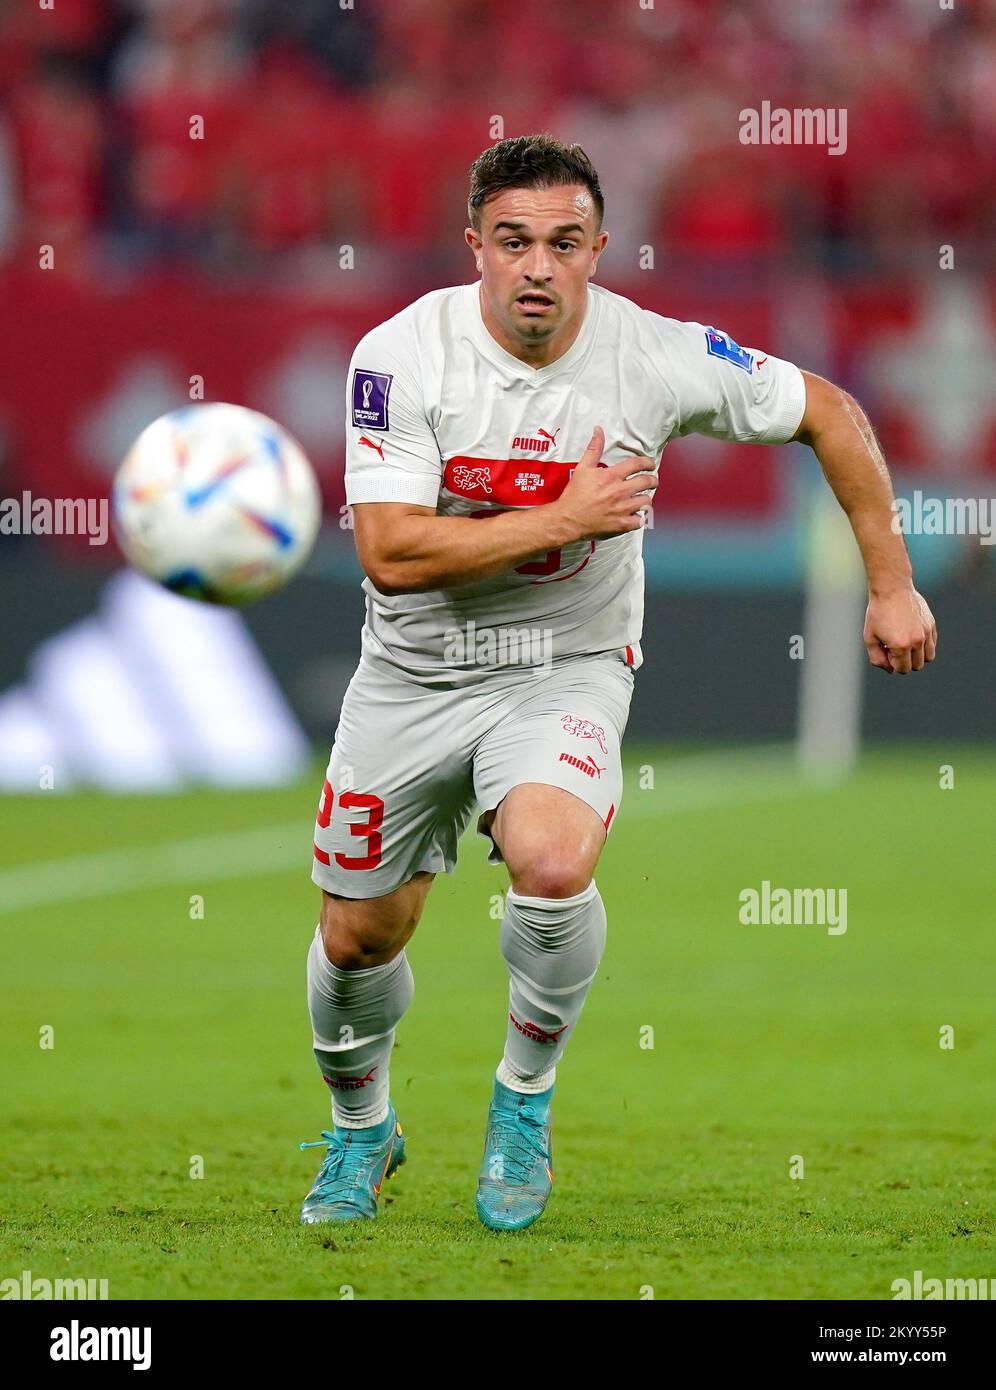 Fifa soccer Cut Out Stock Images & Pictures - Page 2 - Alamy